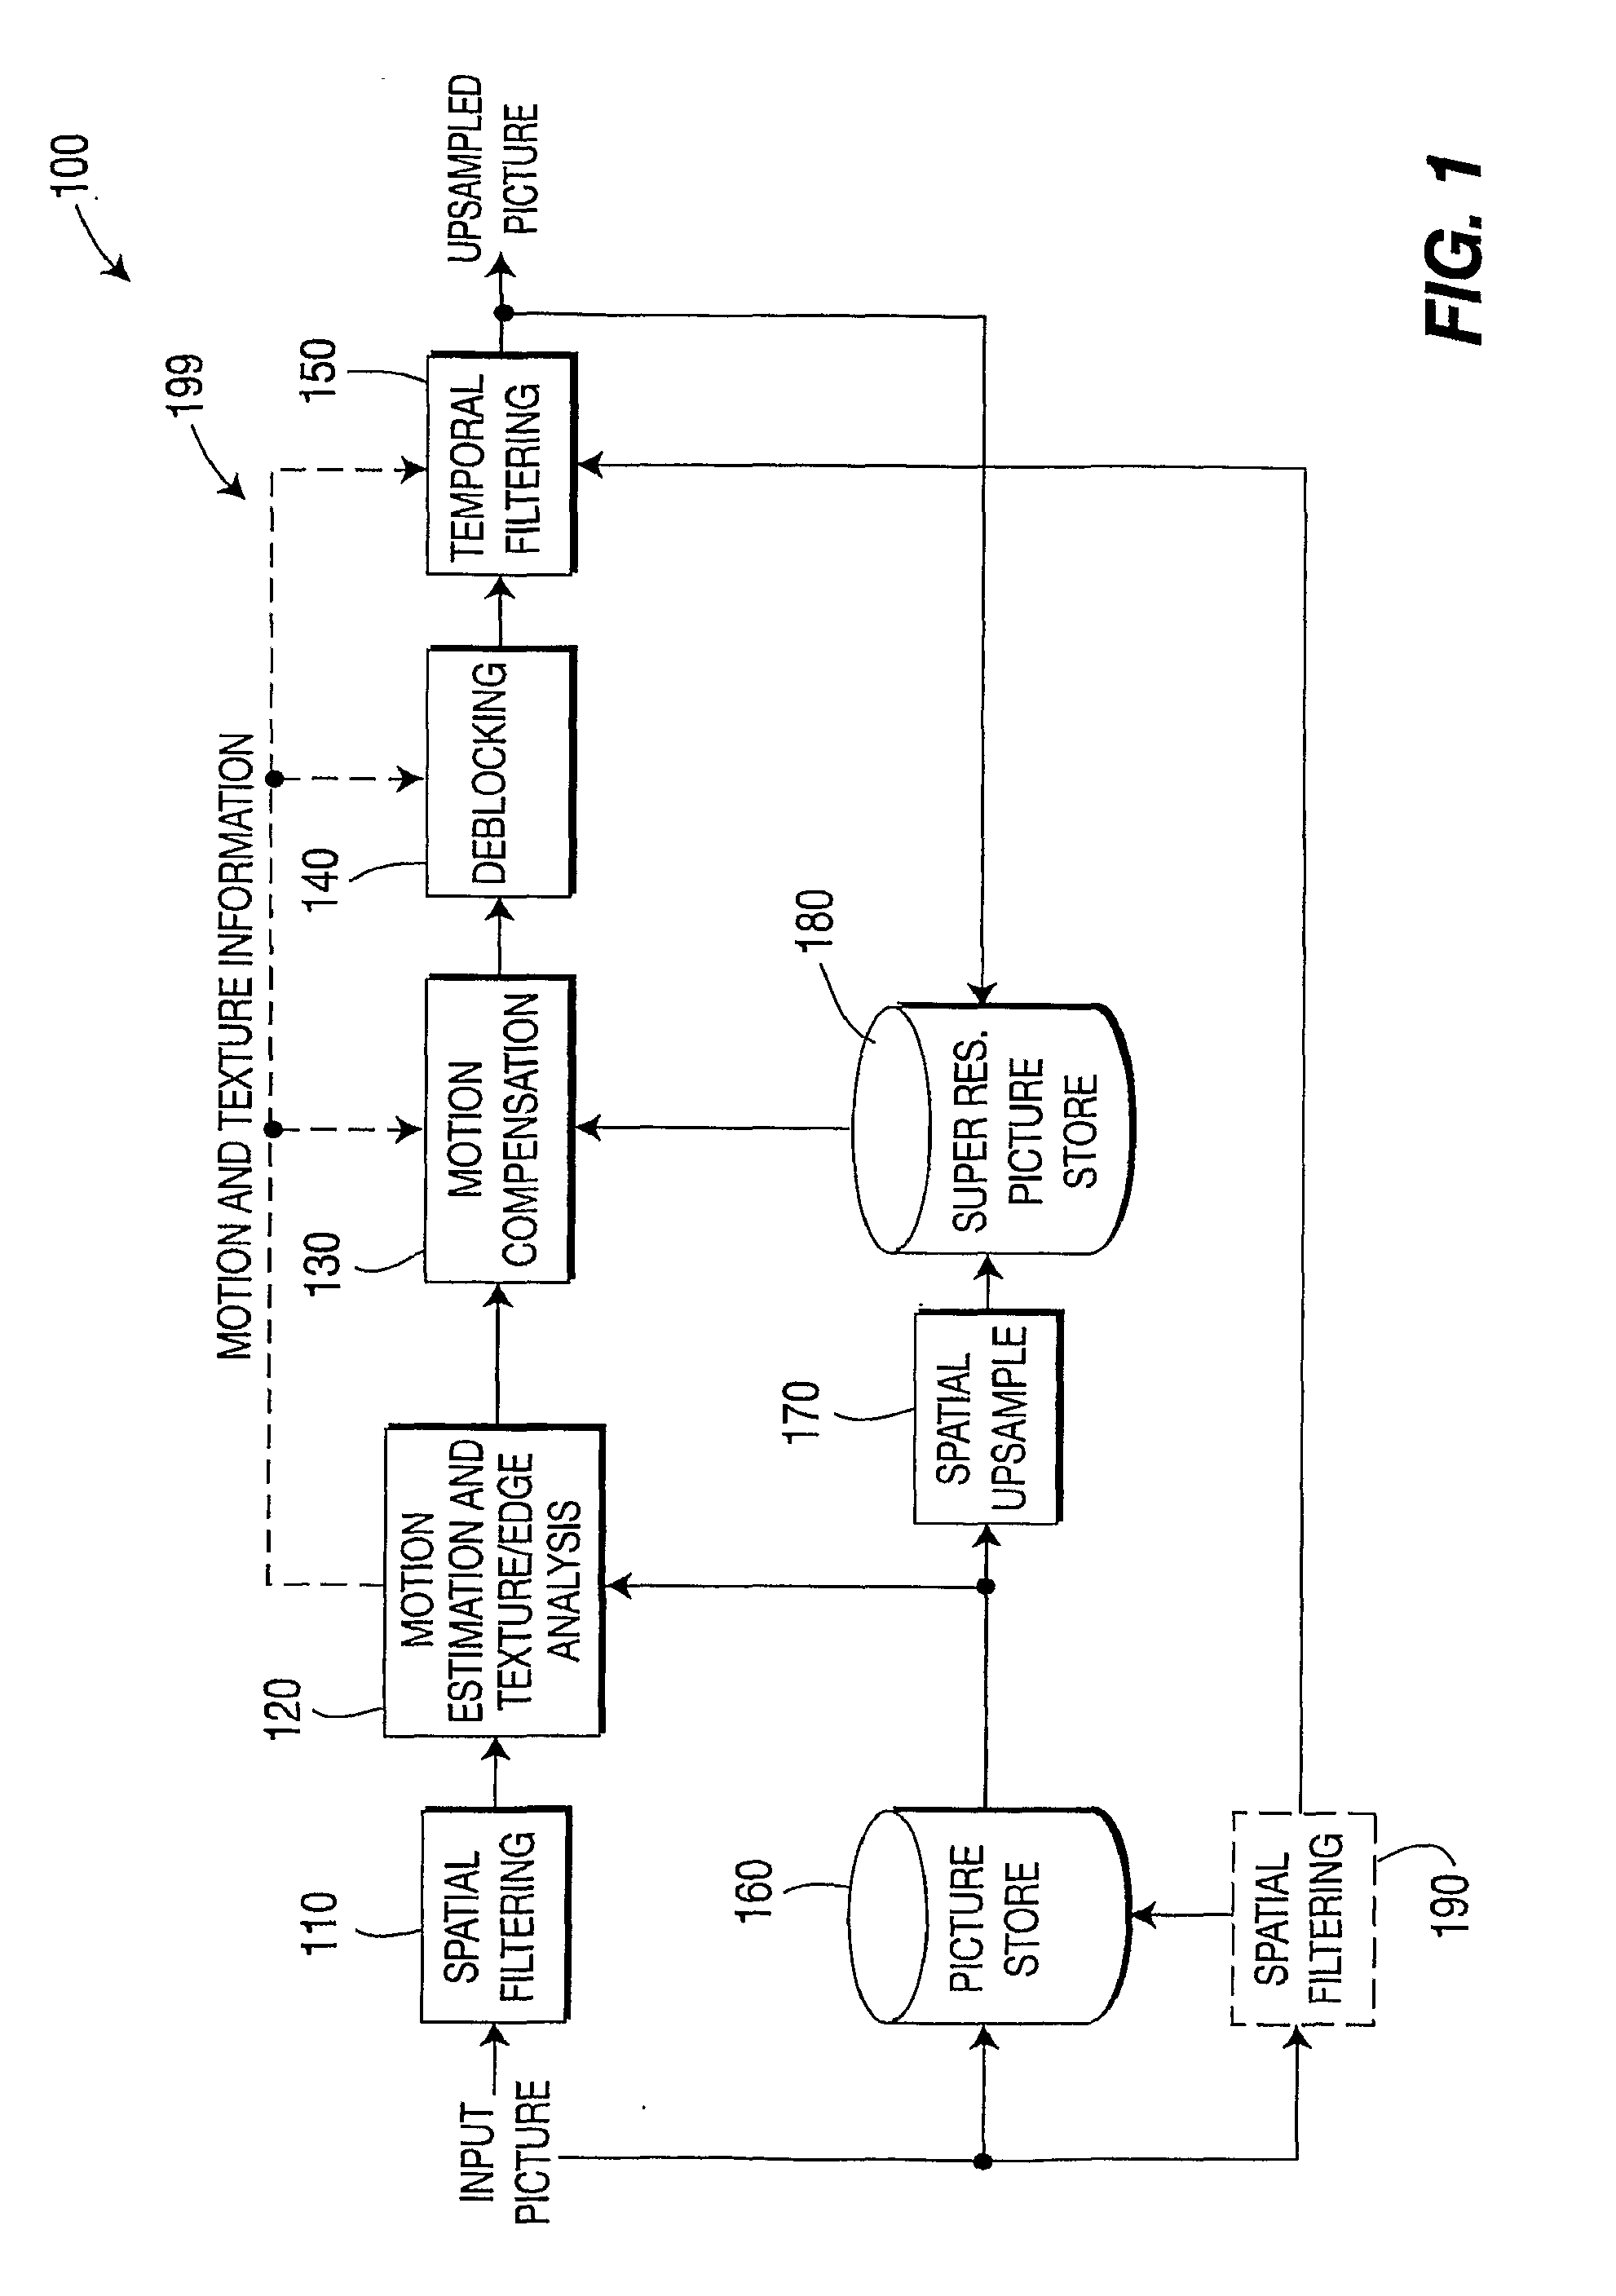 Method and Apparatus for Edge-Based Spatio-Temporal Filtering